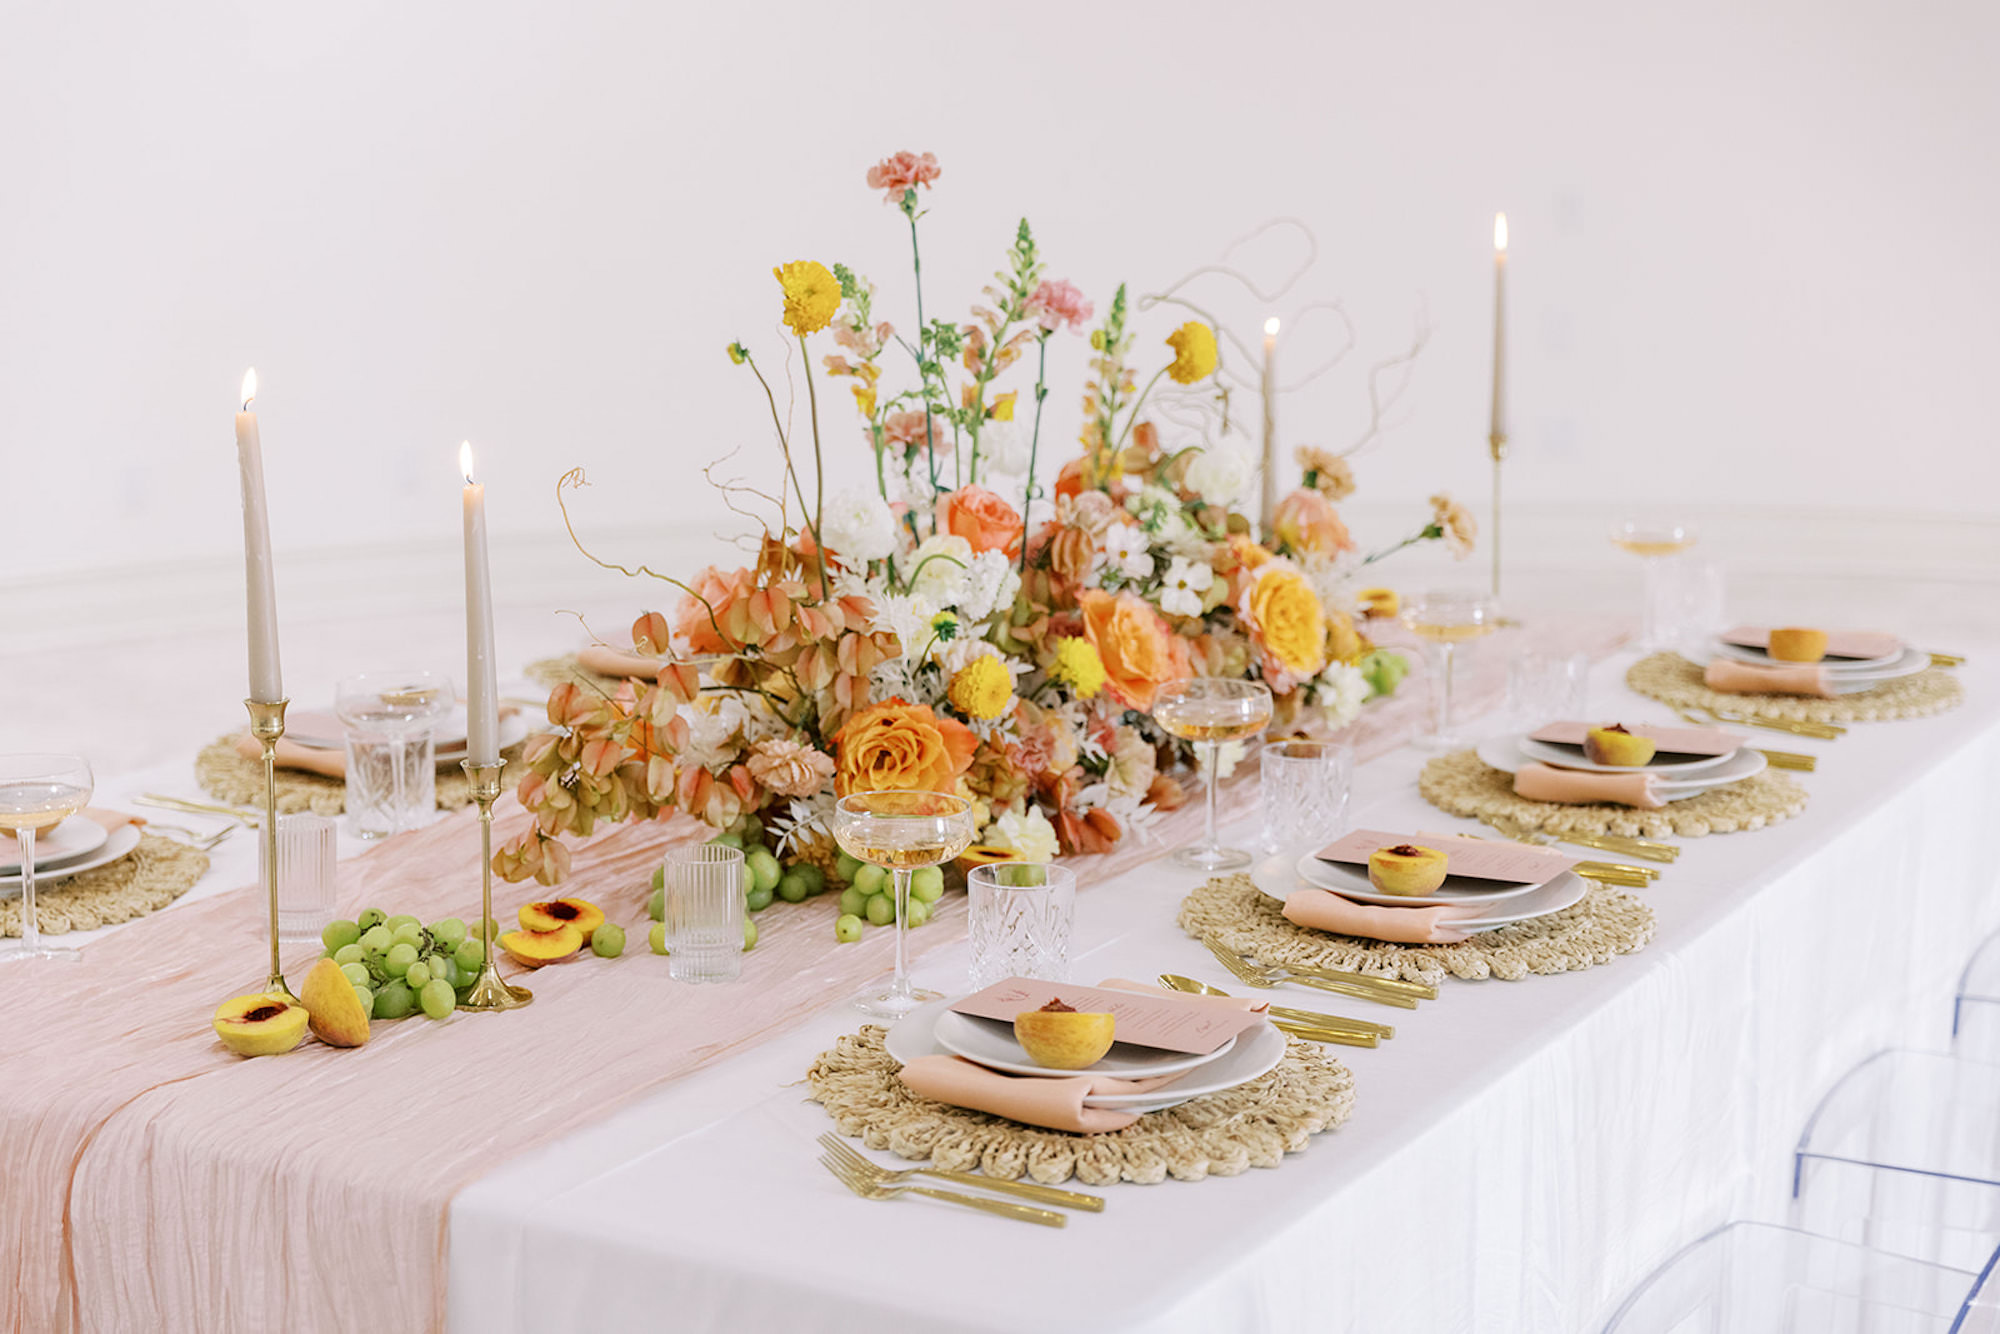 Yellow, Orange, and Pink Garden Rose Dahlia, and Wildflower Romantic Wedding Reception Centerpiece Ideas | Gold Flatware | White Tablecloth Linen | Individual Menu Inspiration | Hyacinth Placemat | Peach Themed Wedding Inspiration